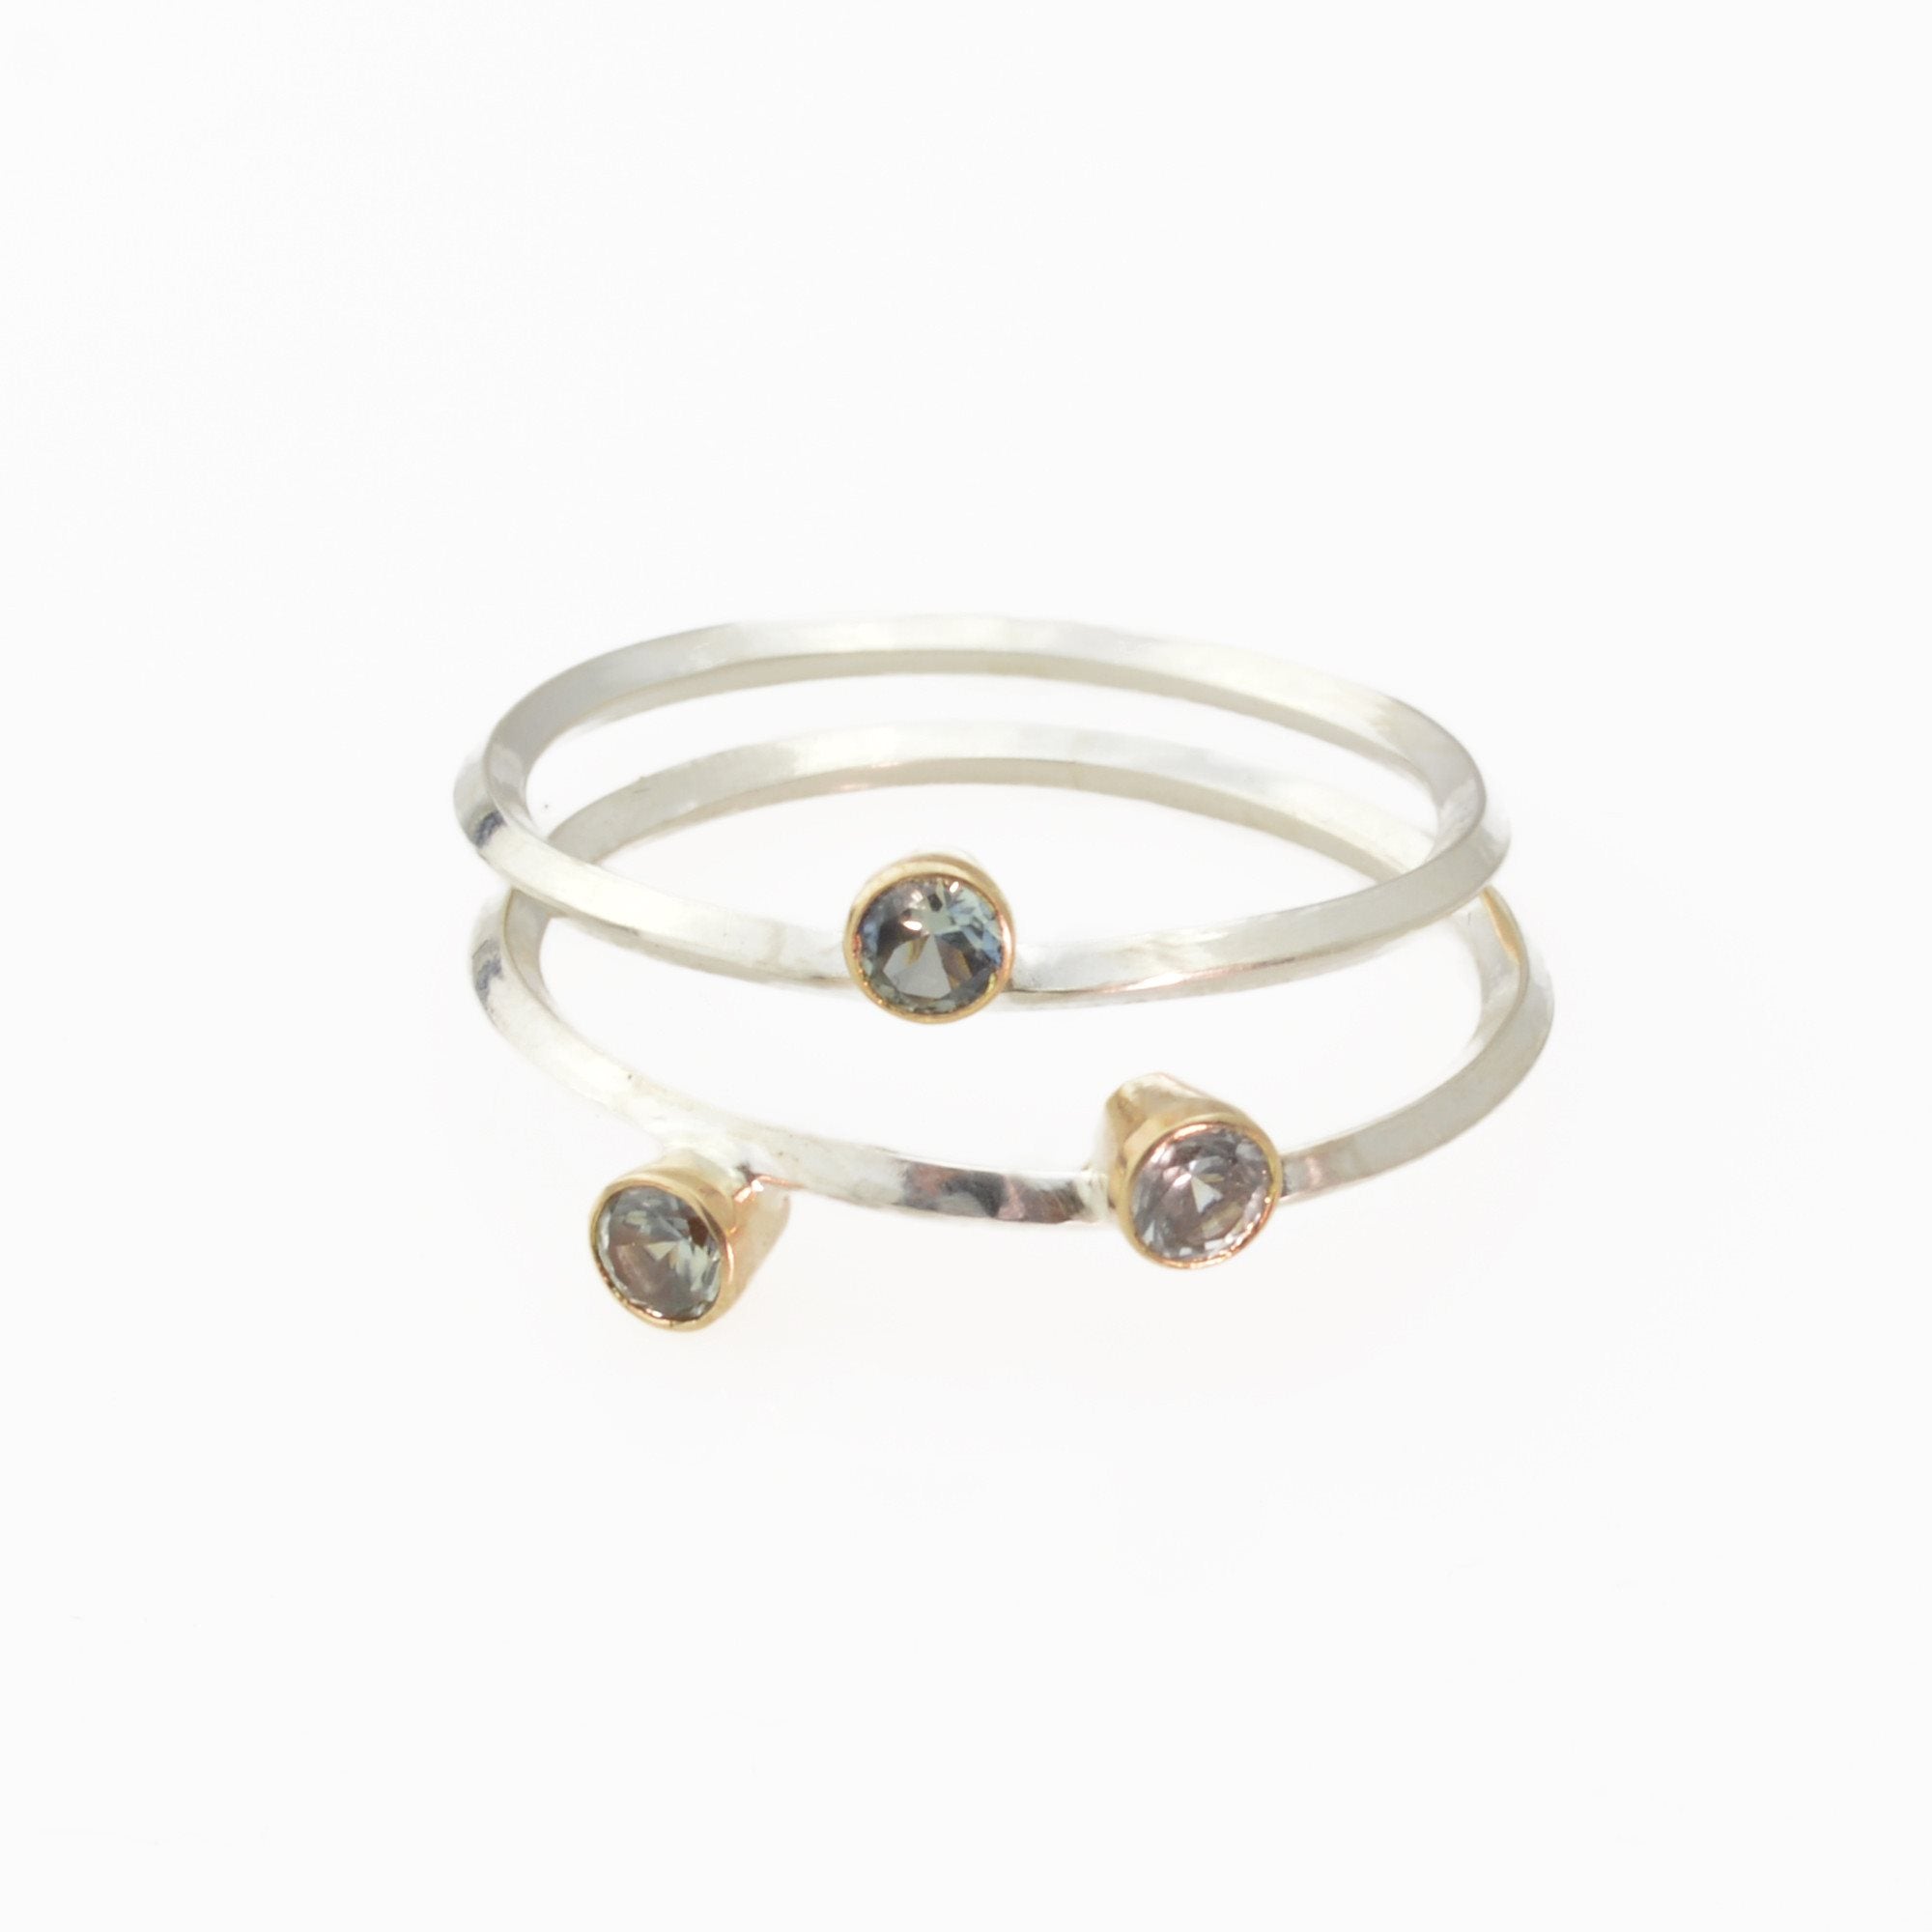 Metropolis One Montana Sapphire Stacking Ring in 14k Gold and Sterling Silver